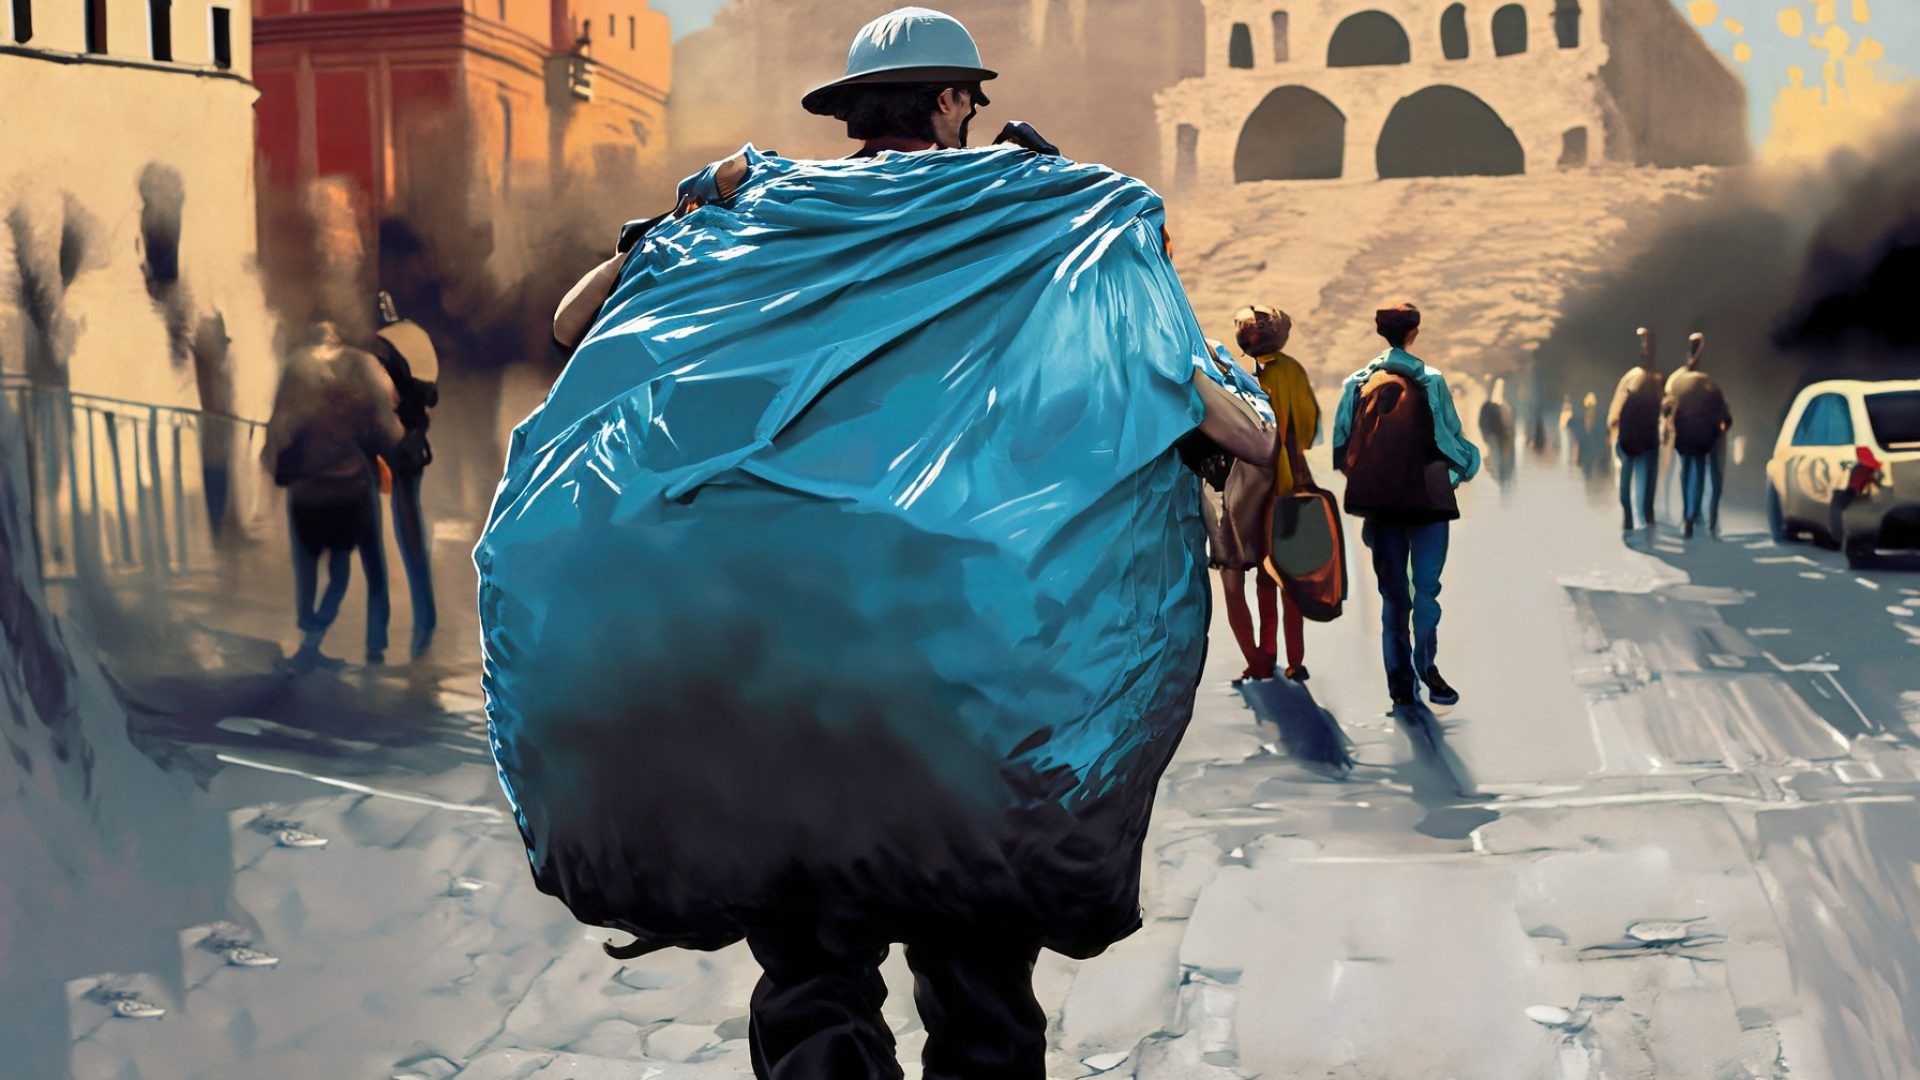 Firefly following someone holding a big garbage bag on their back closely in rome 12820